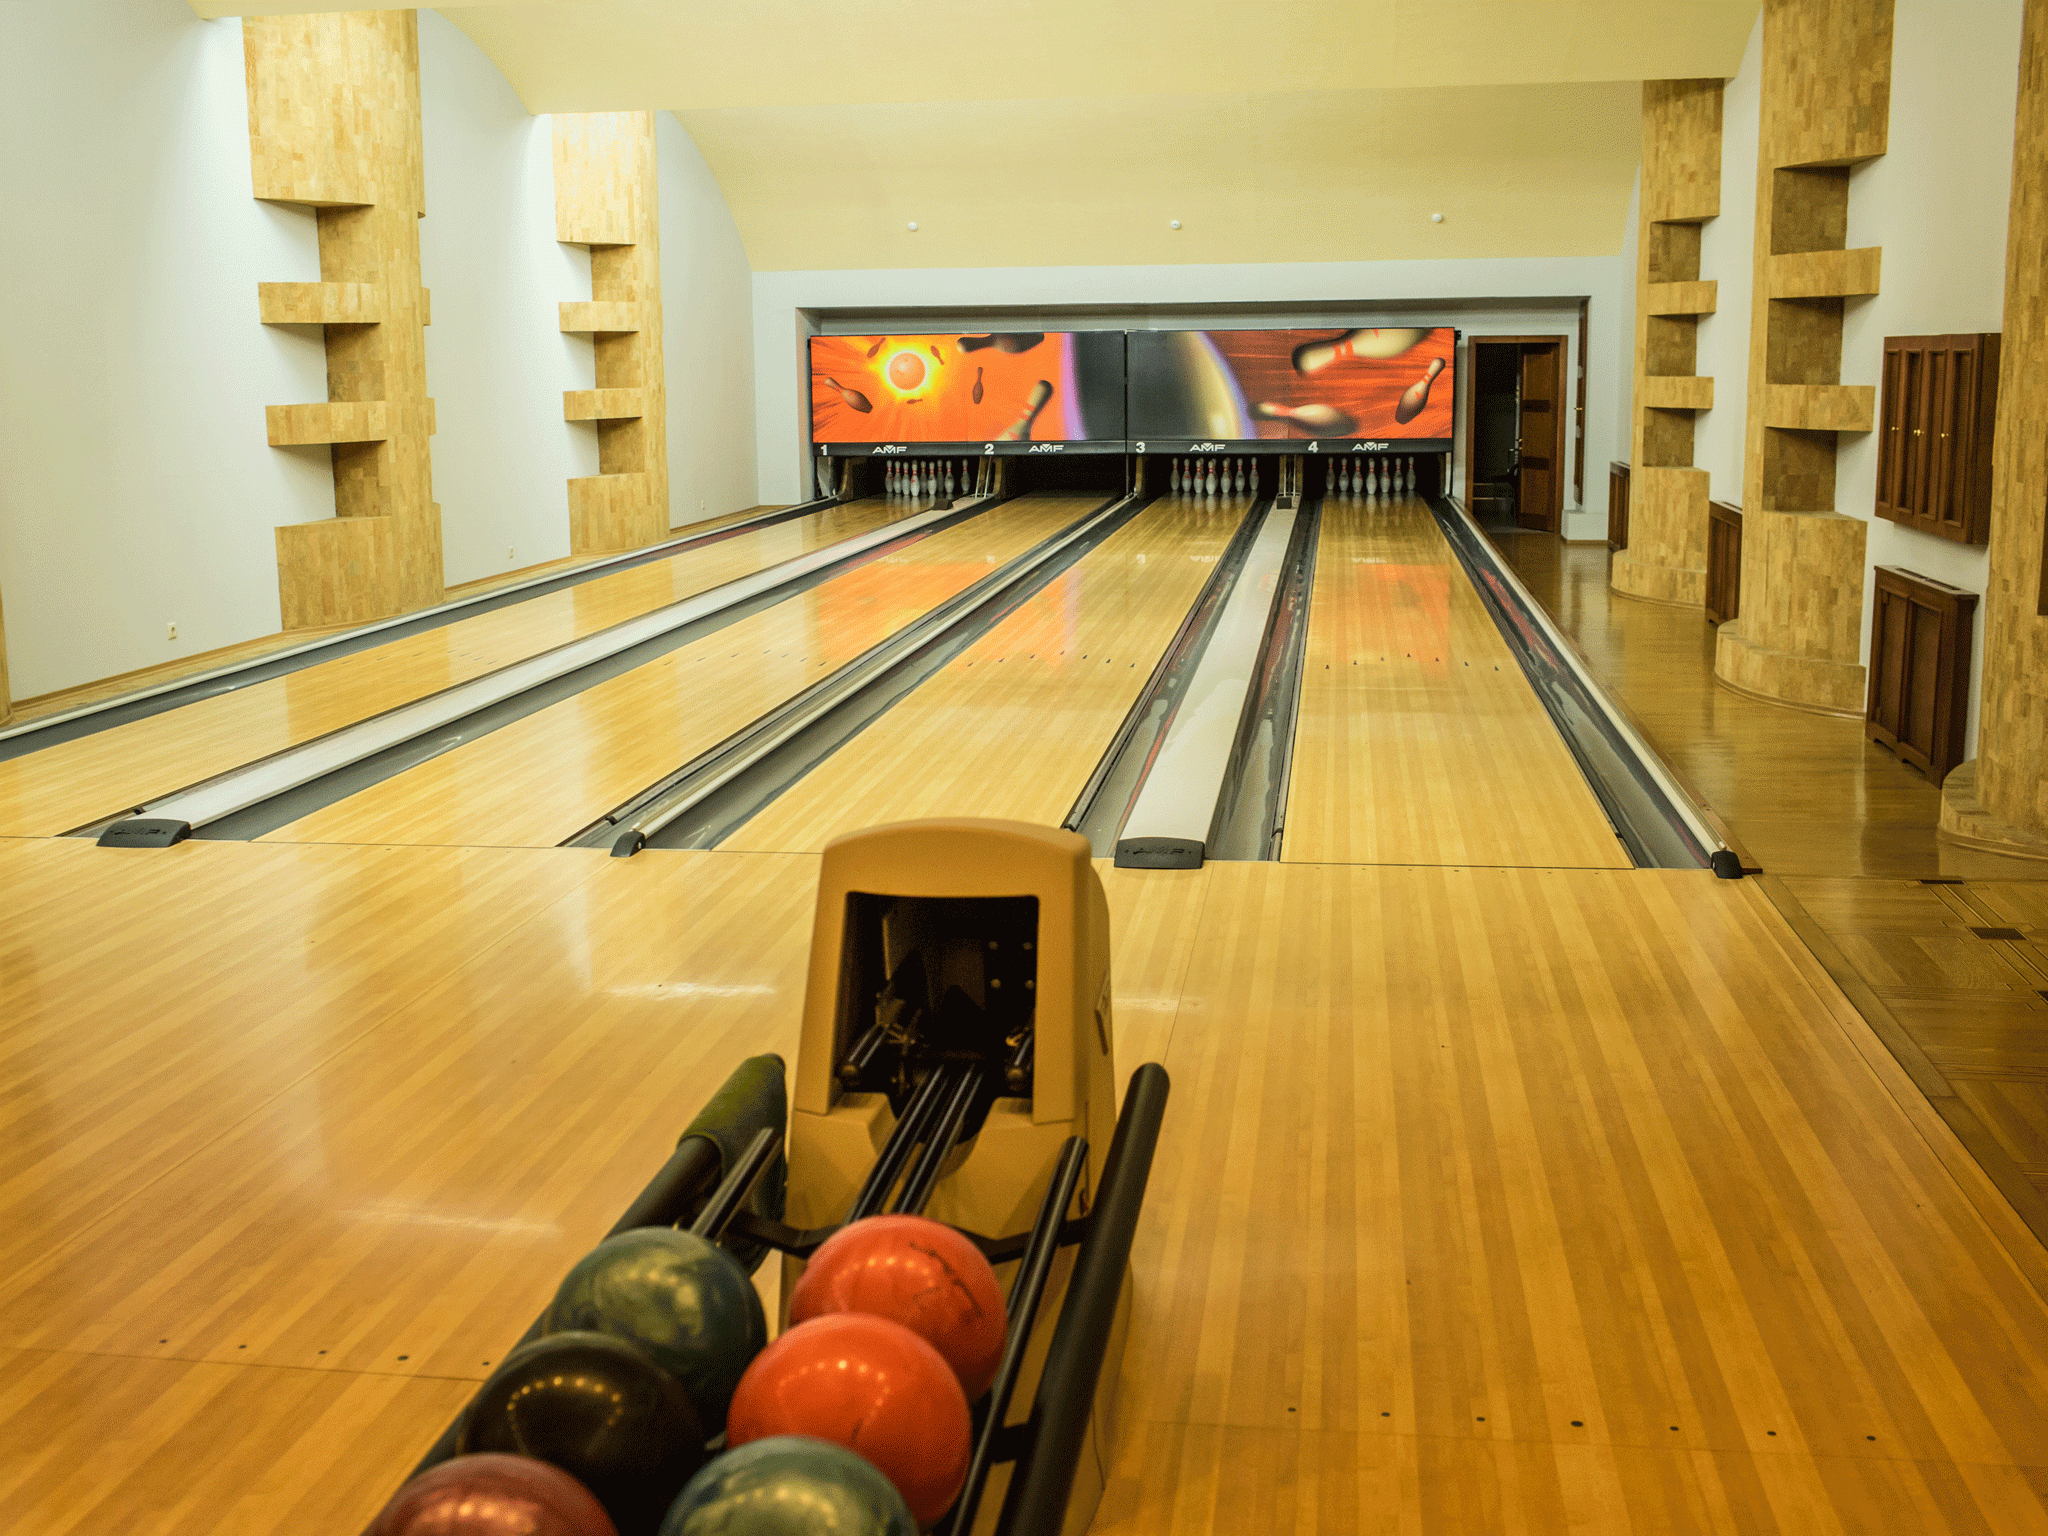 The seven-year-old was disqualified from a bowling tournament after winning it because he wore the wrong trousers